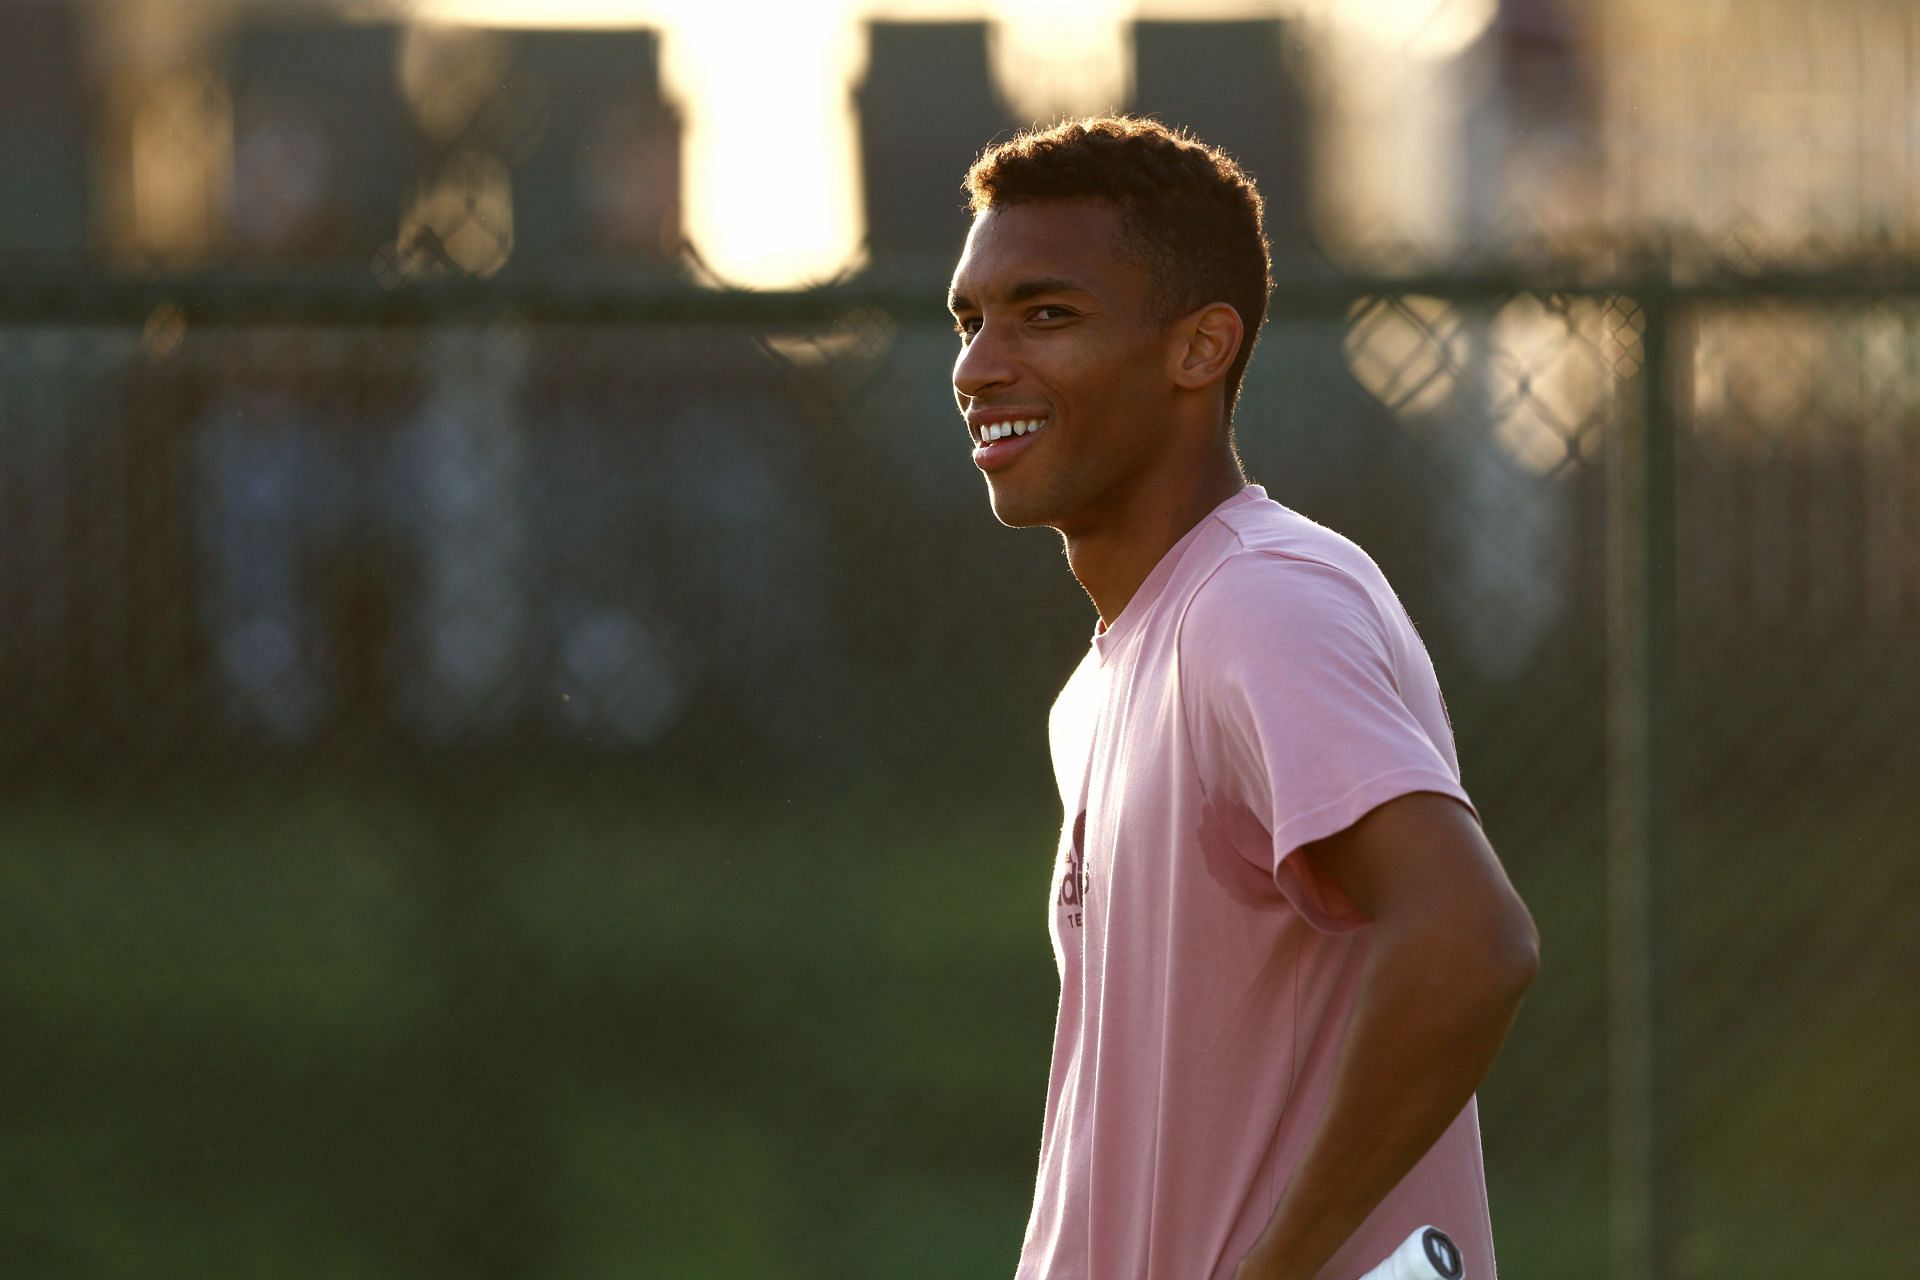 Felix Auger-Aliassime at the 2022 Indian Wells Open.